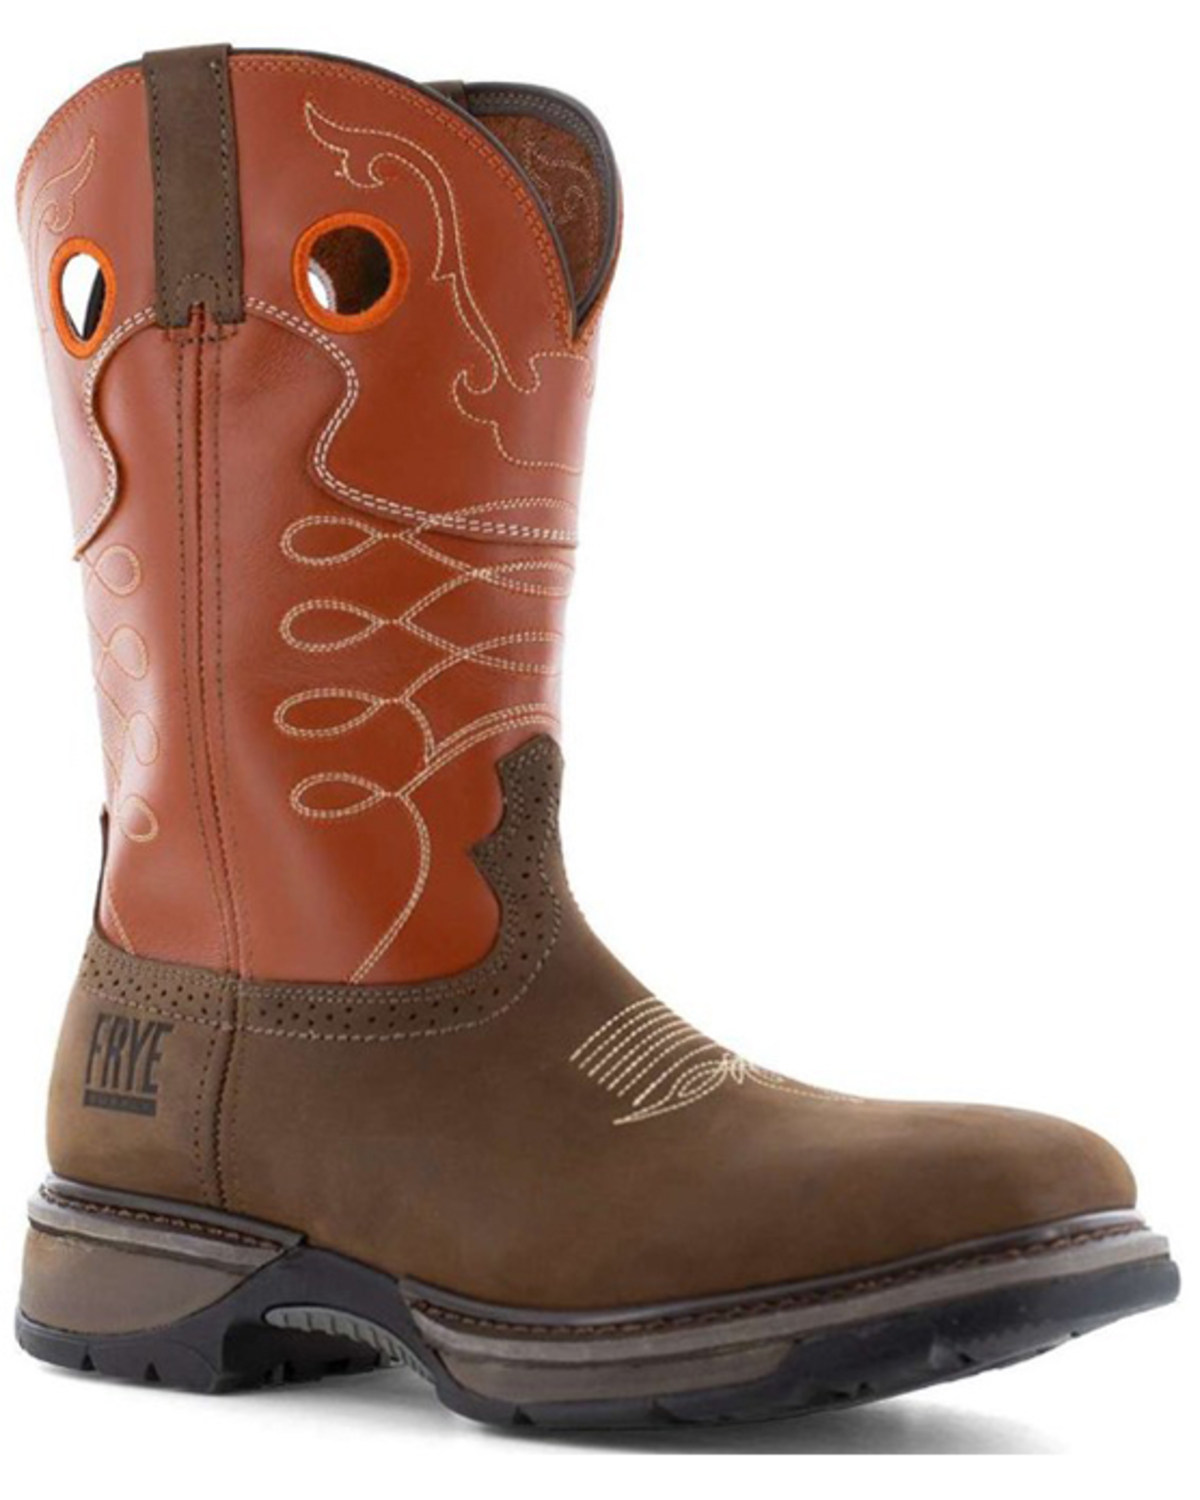 Frye Men's 10" Safety Crafted Wellington Work Boots - Steel Toe